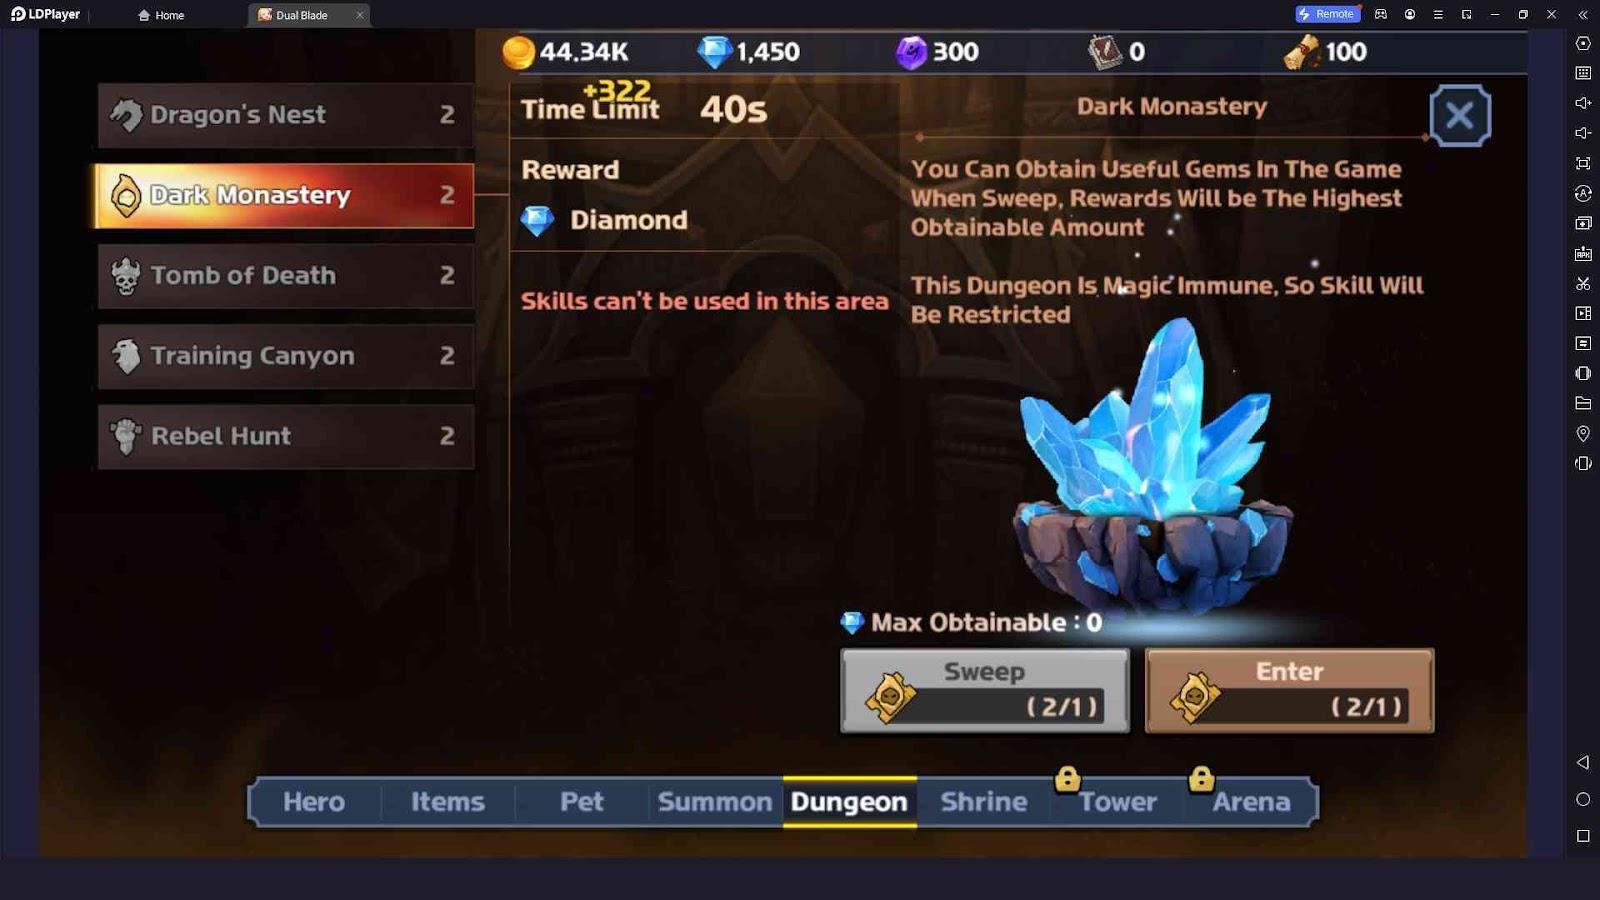 Take Part in Dungeon Battles and Earn More Rewards